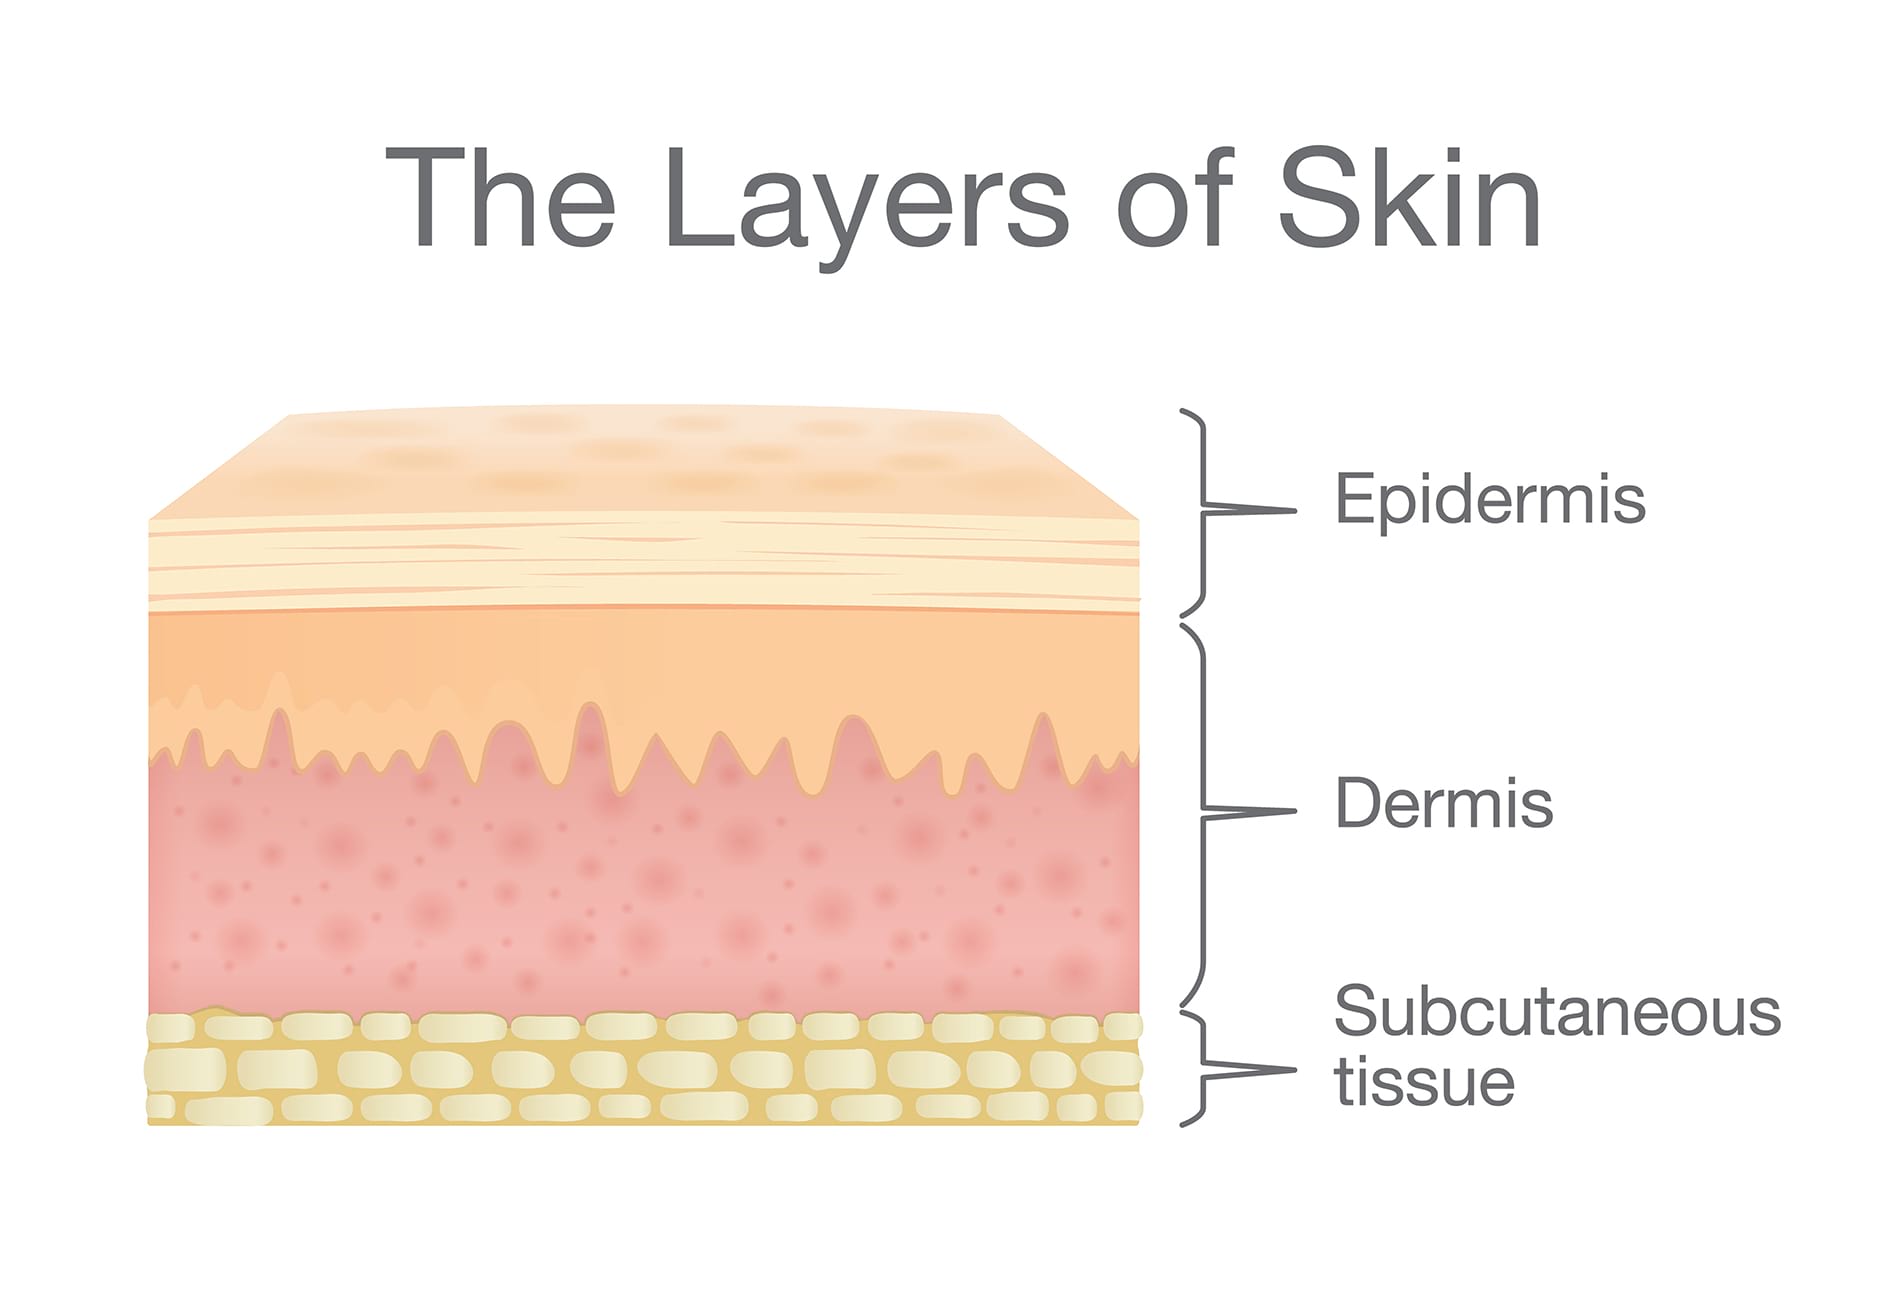 Graphic showing the three main layers of skin.